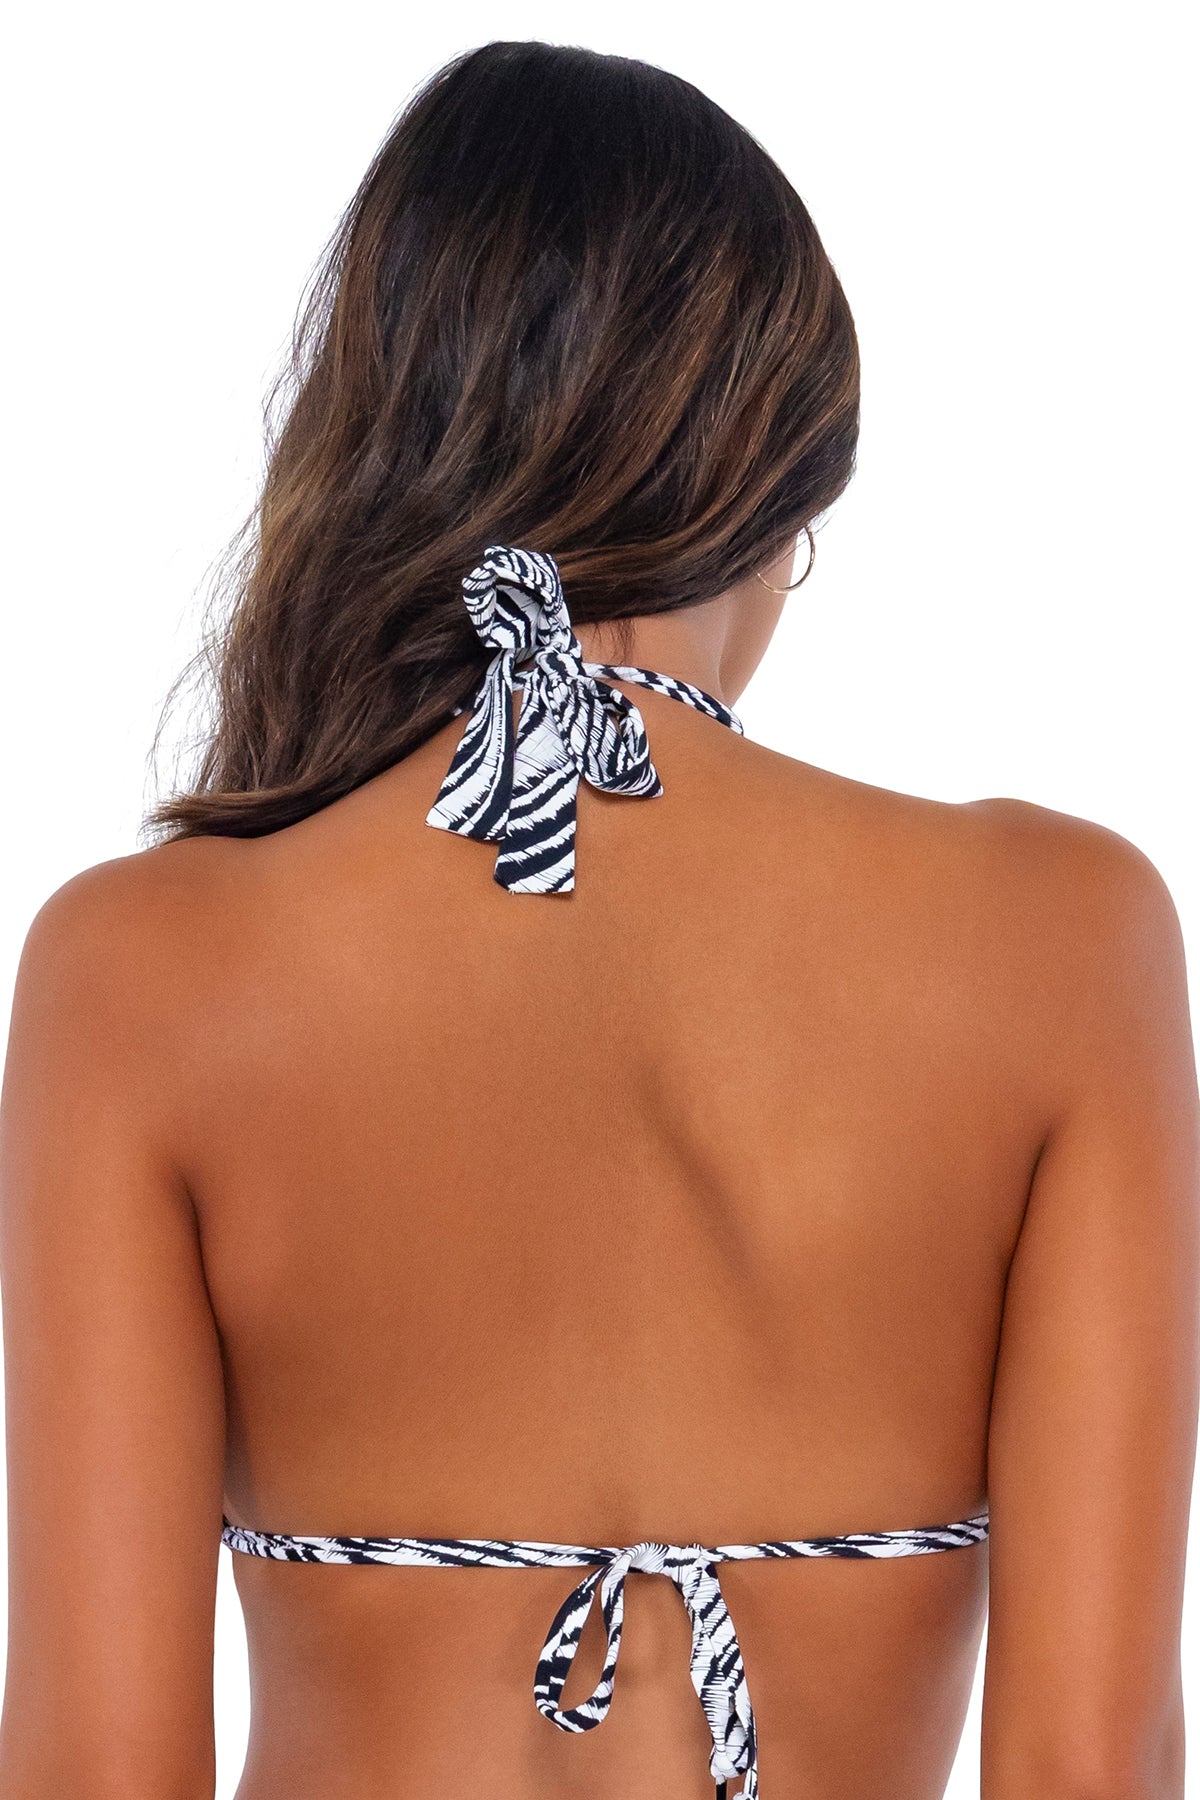 Back pose #1 of Chonzie wearing Swim Systems Against the Grain Mila Triangle Top